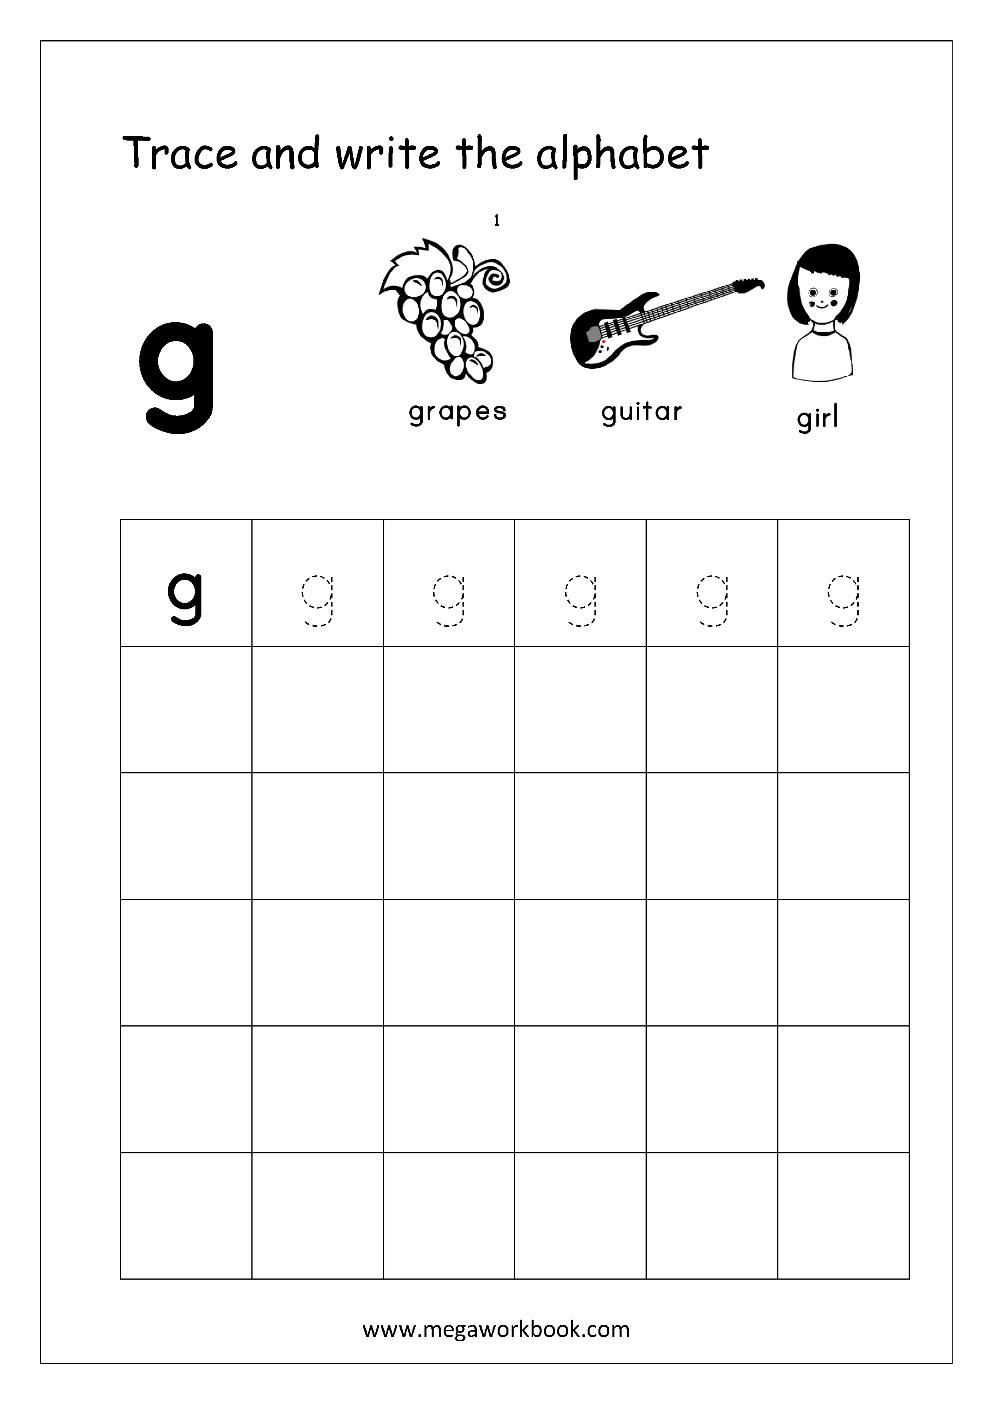 Free English Worksheets - Alphabet Writing (Small Letters pertaining to Tracing Small Letter G Worksheet